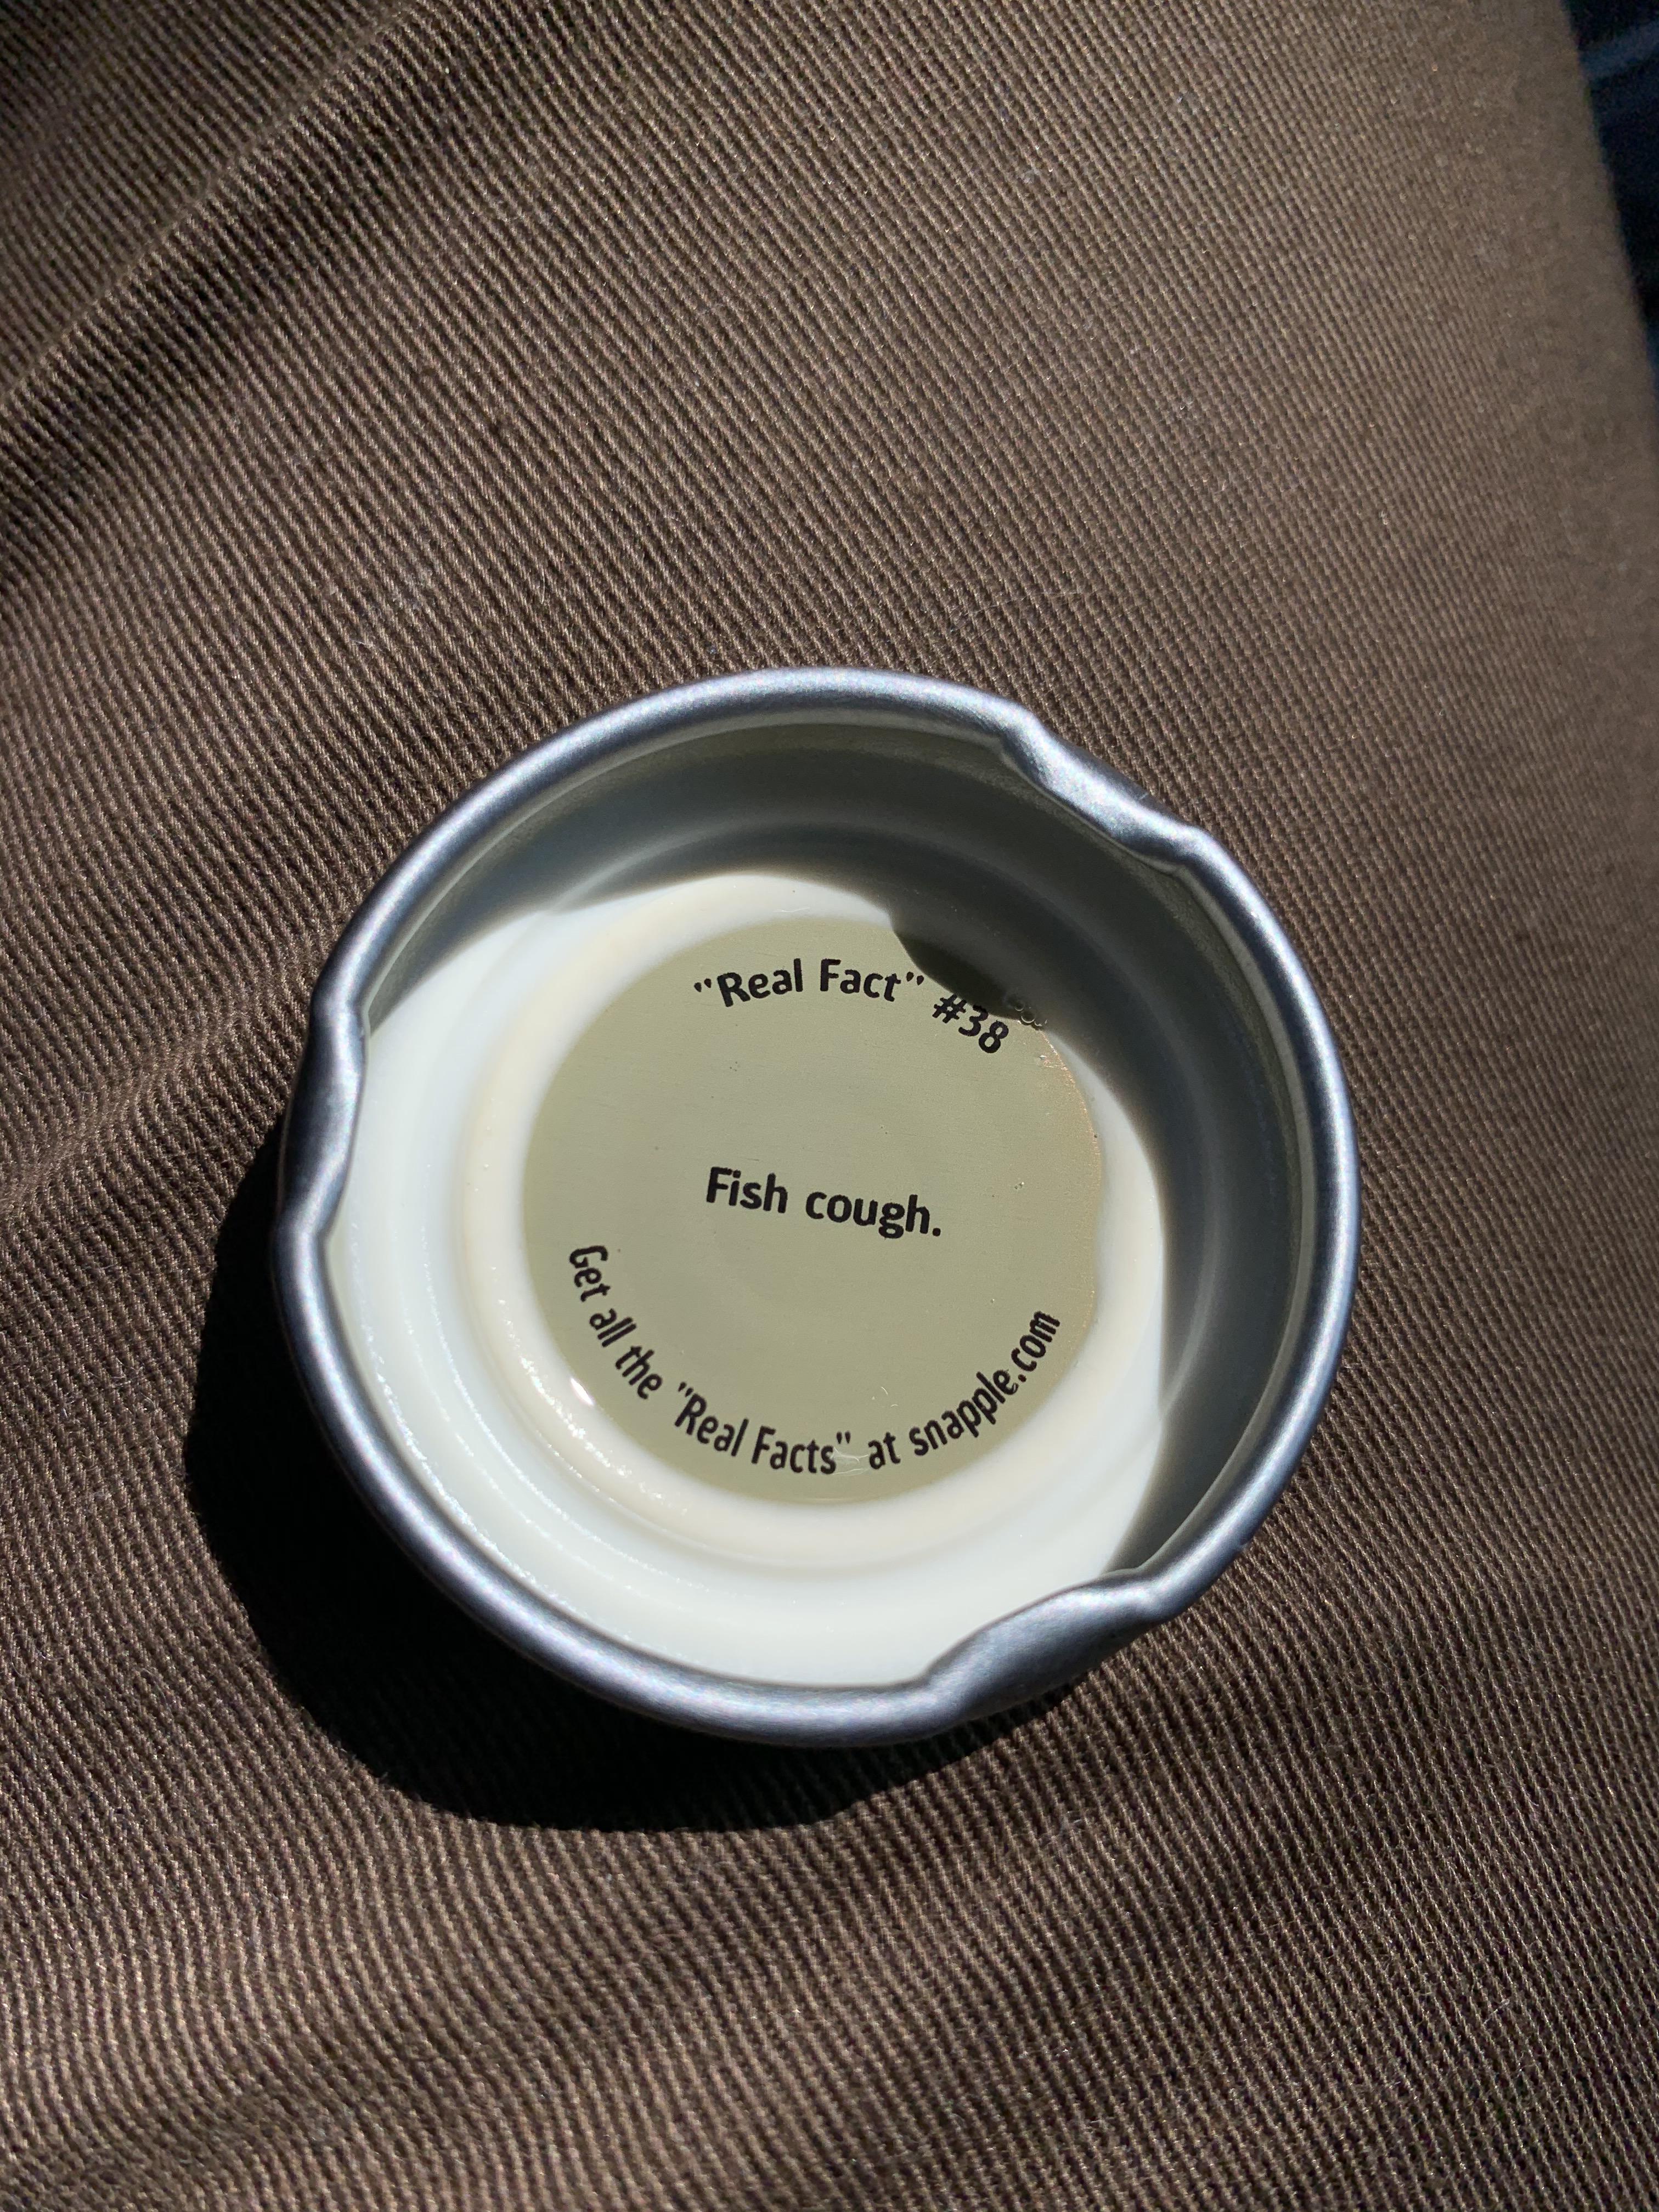 I don't actually beliebe you, Snapple